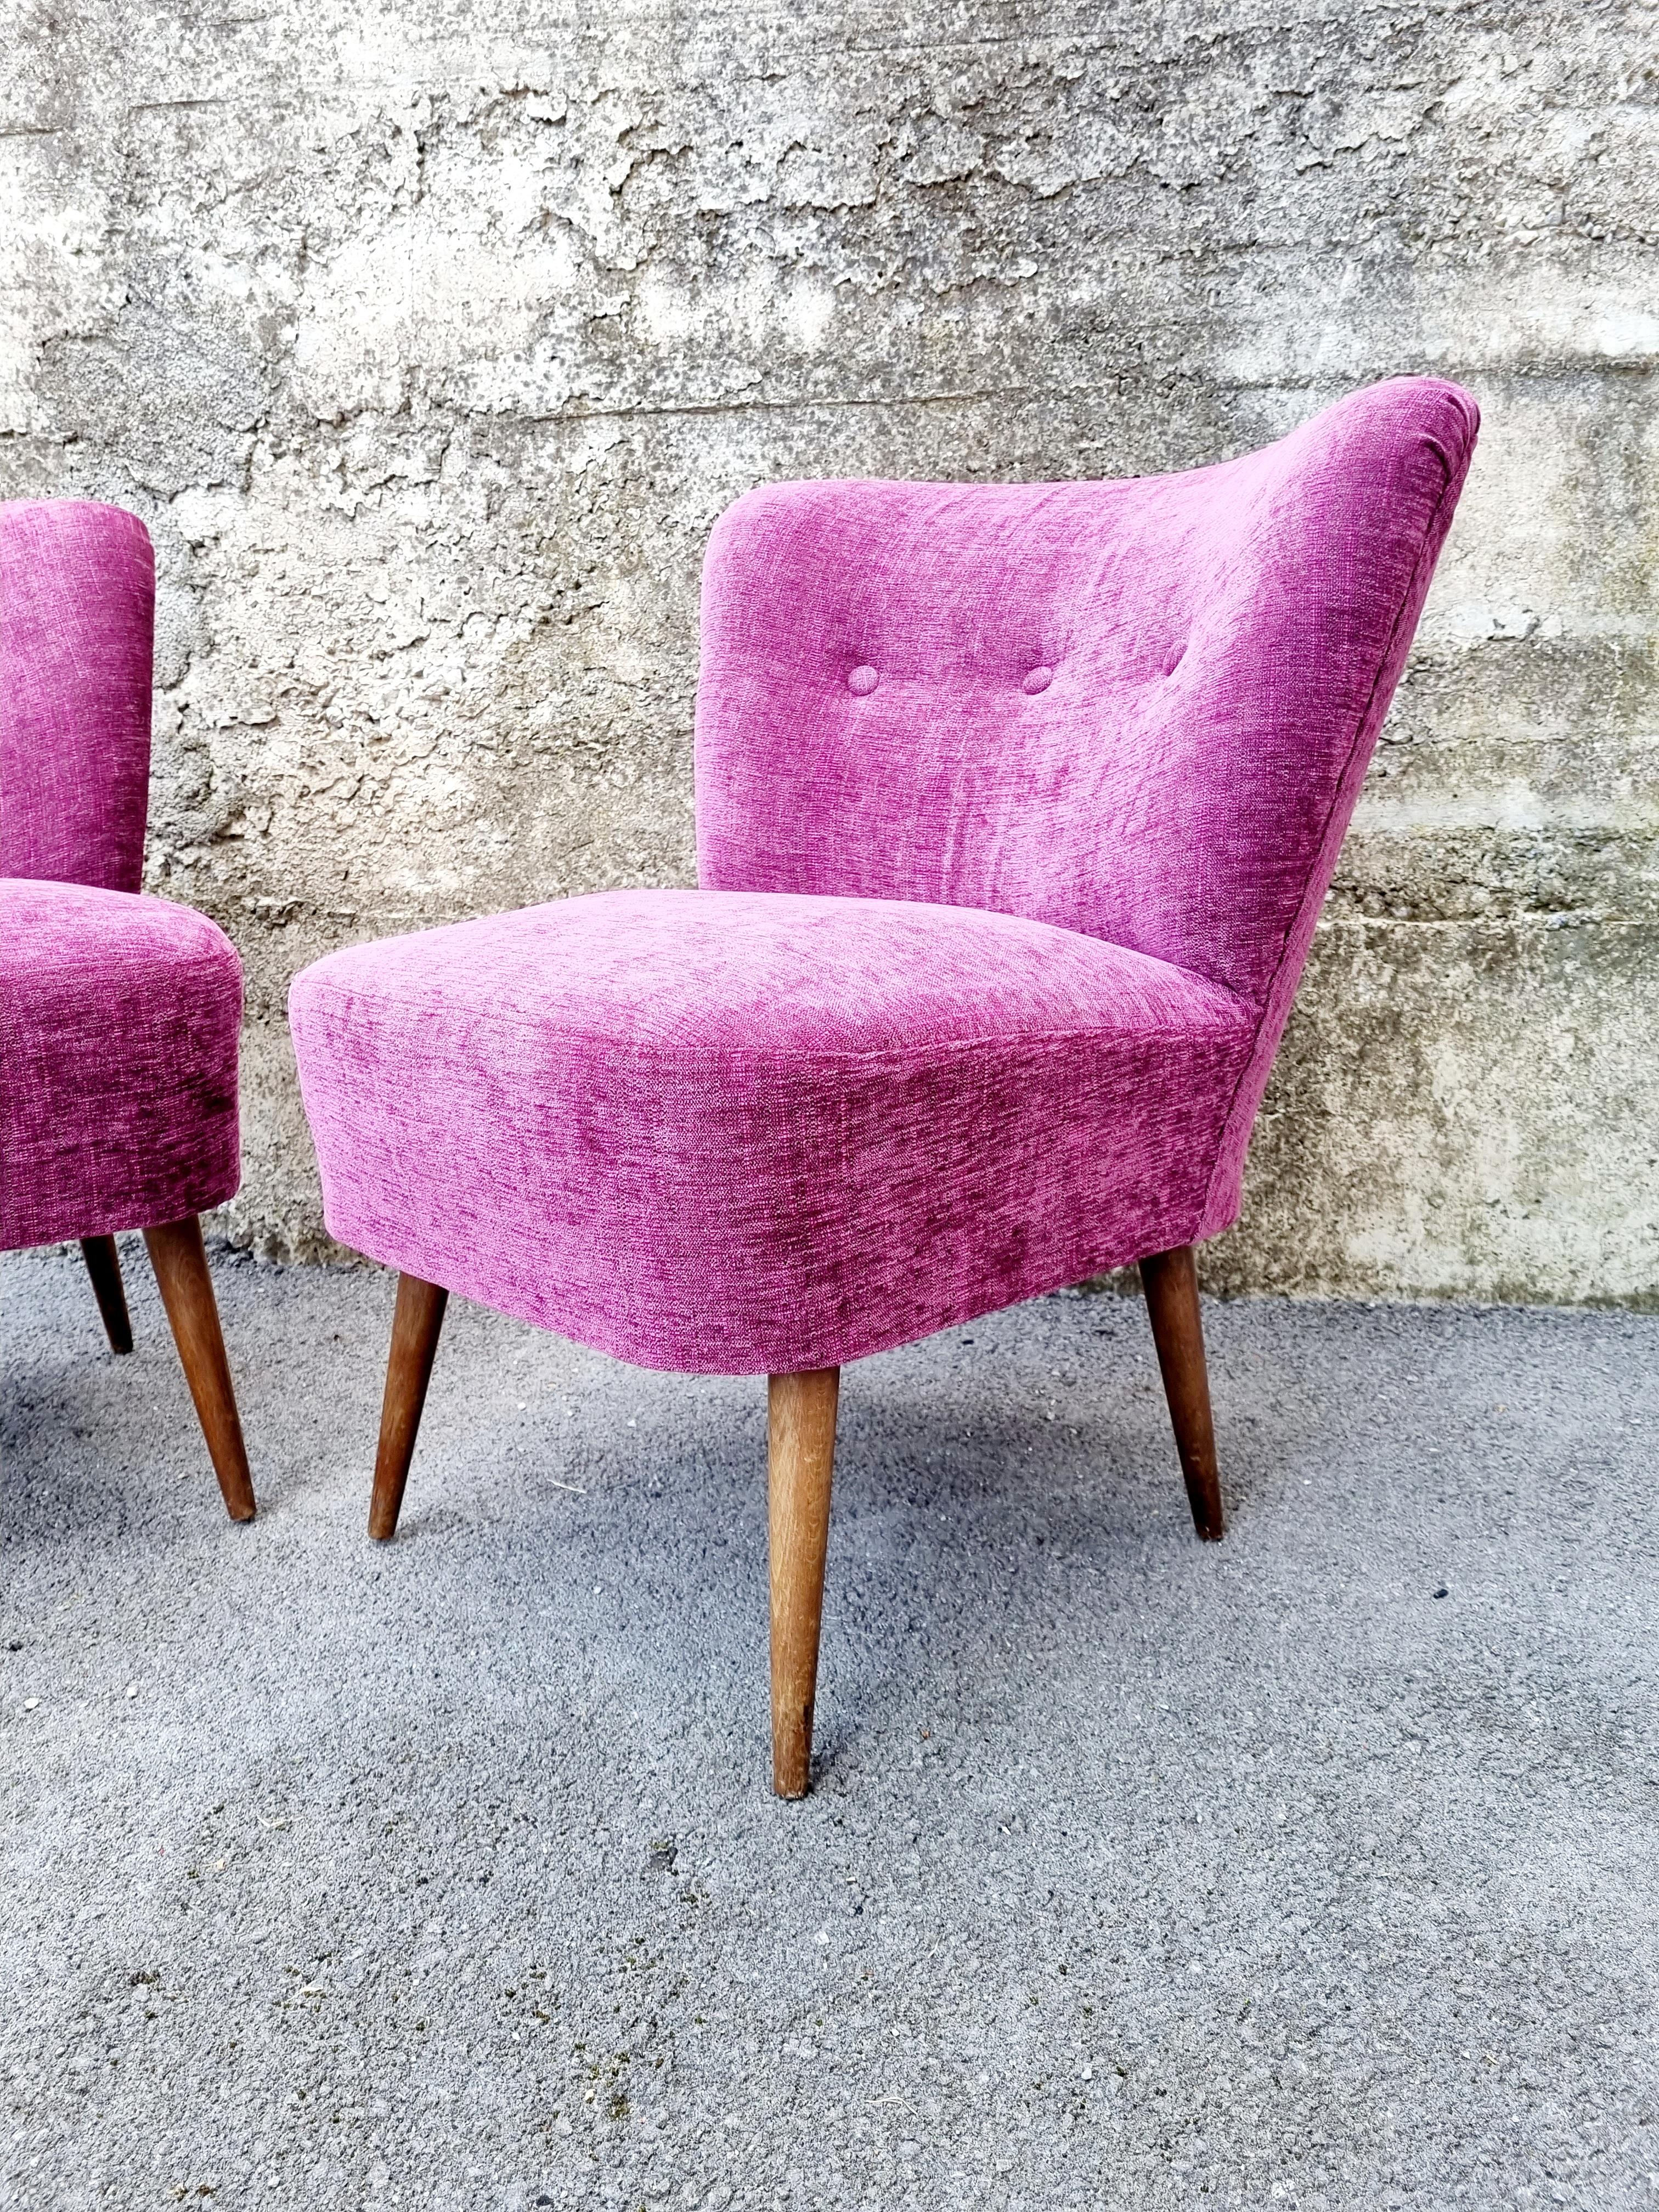 Mid-Century Modern Cocktail Chairs were made in '60s, Scandinavian design.
These beautiful chairs will create a charming vintage atmosphere in any room of your home. Very retro and beautiful piece.

Chairs have new purple fabric. They are